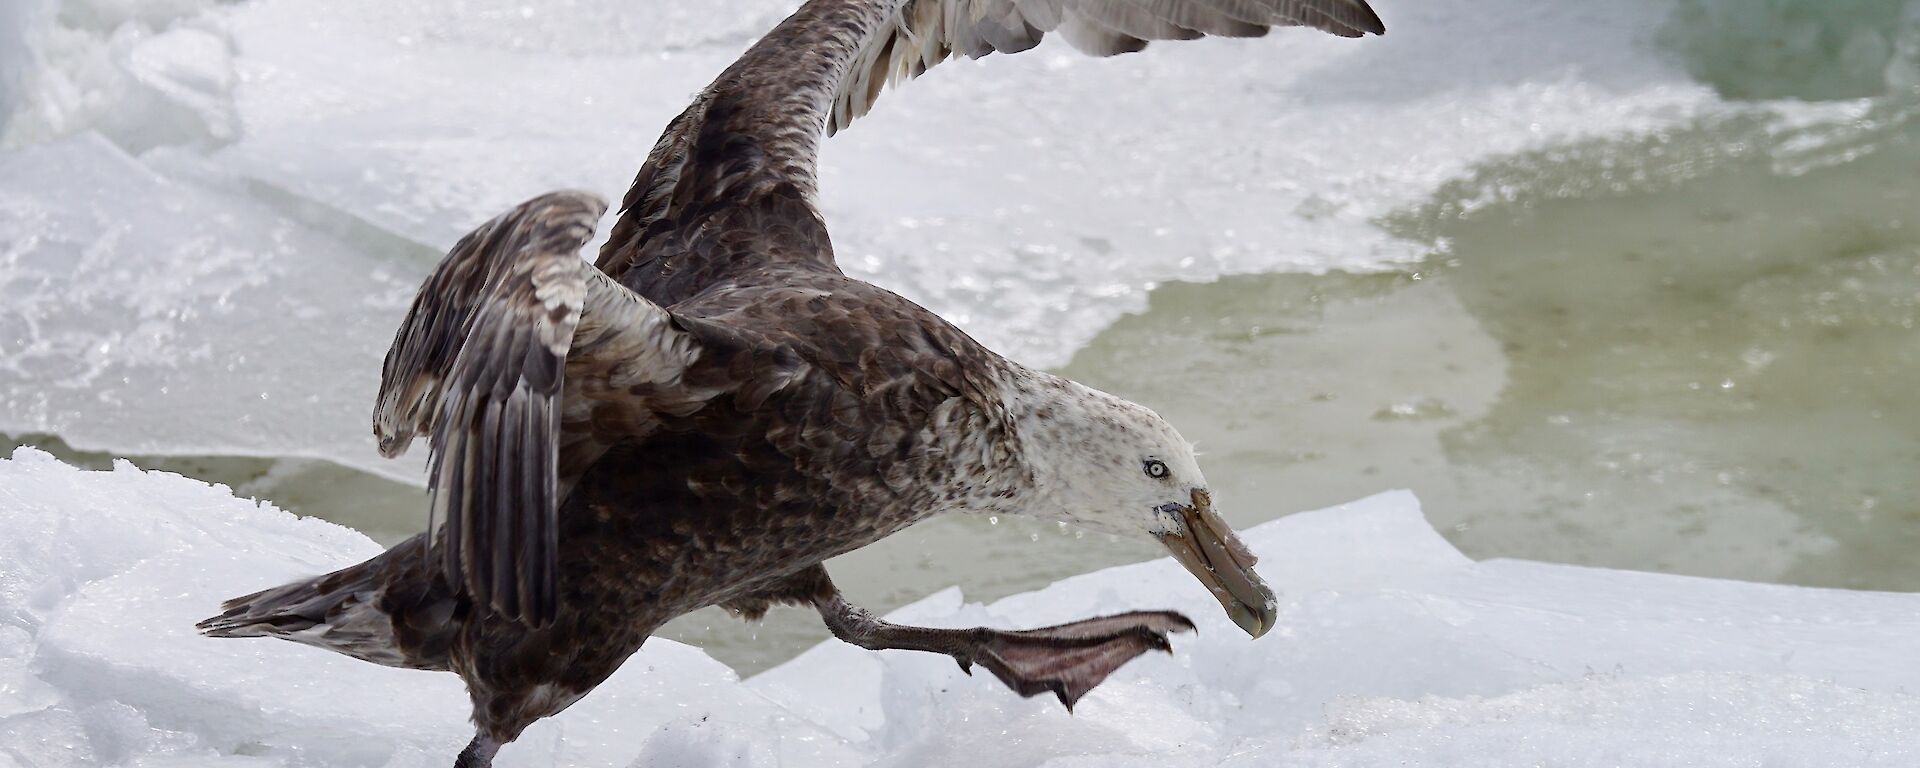 Southern giant petrel landing on the ice